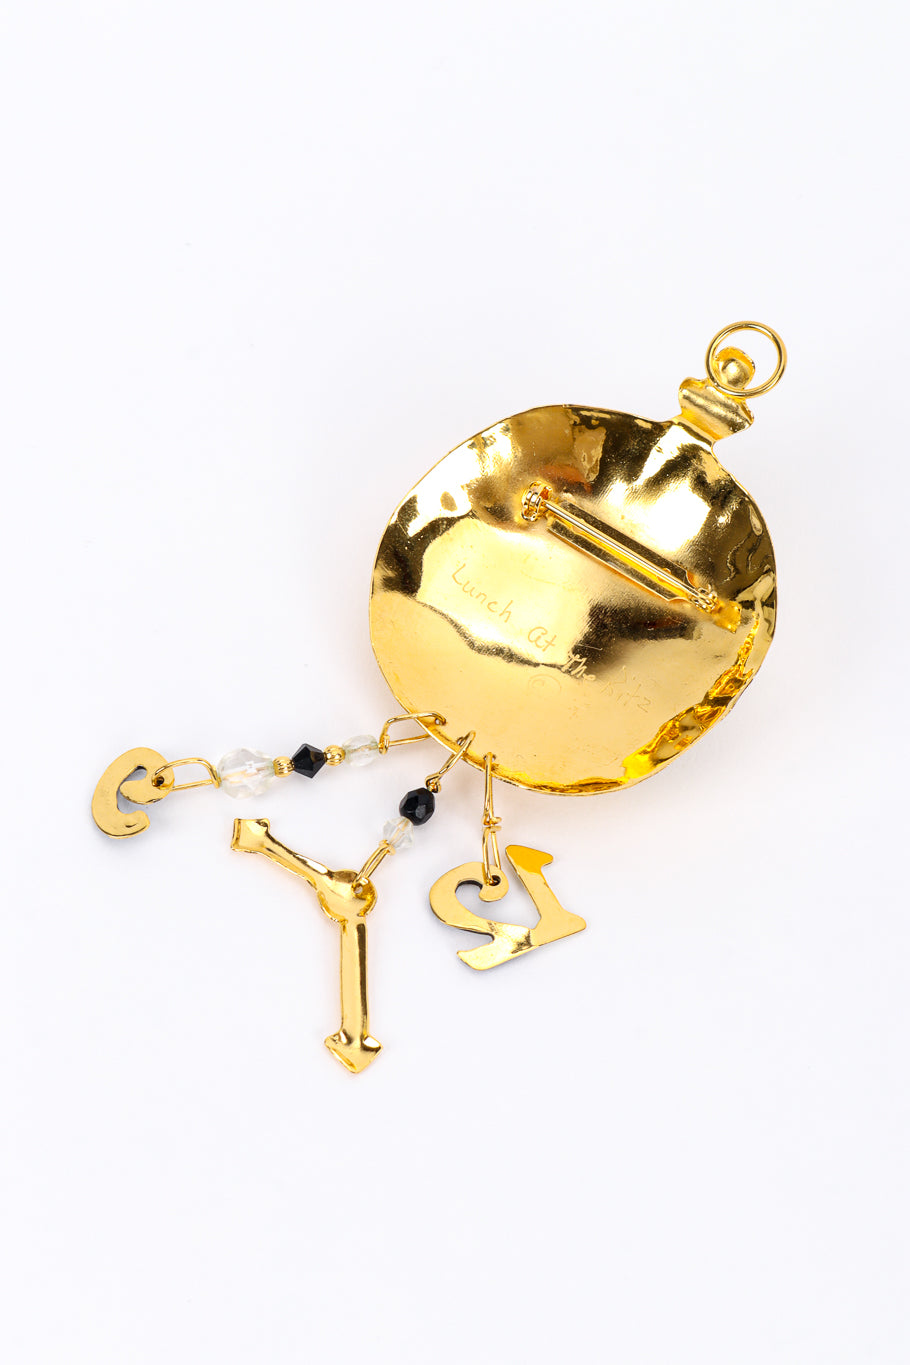 Vintage Lunch at the Ritz Pocket Watch Charm Brooch back @recess la